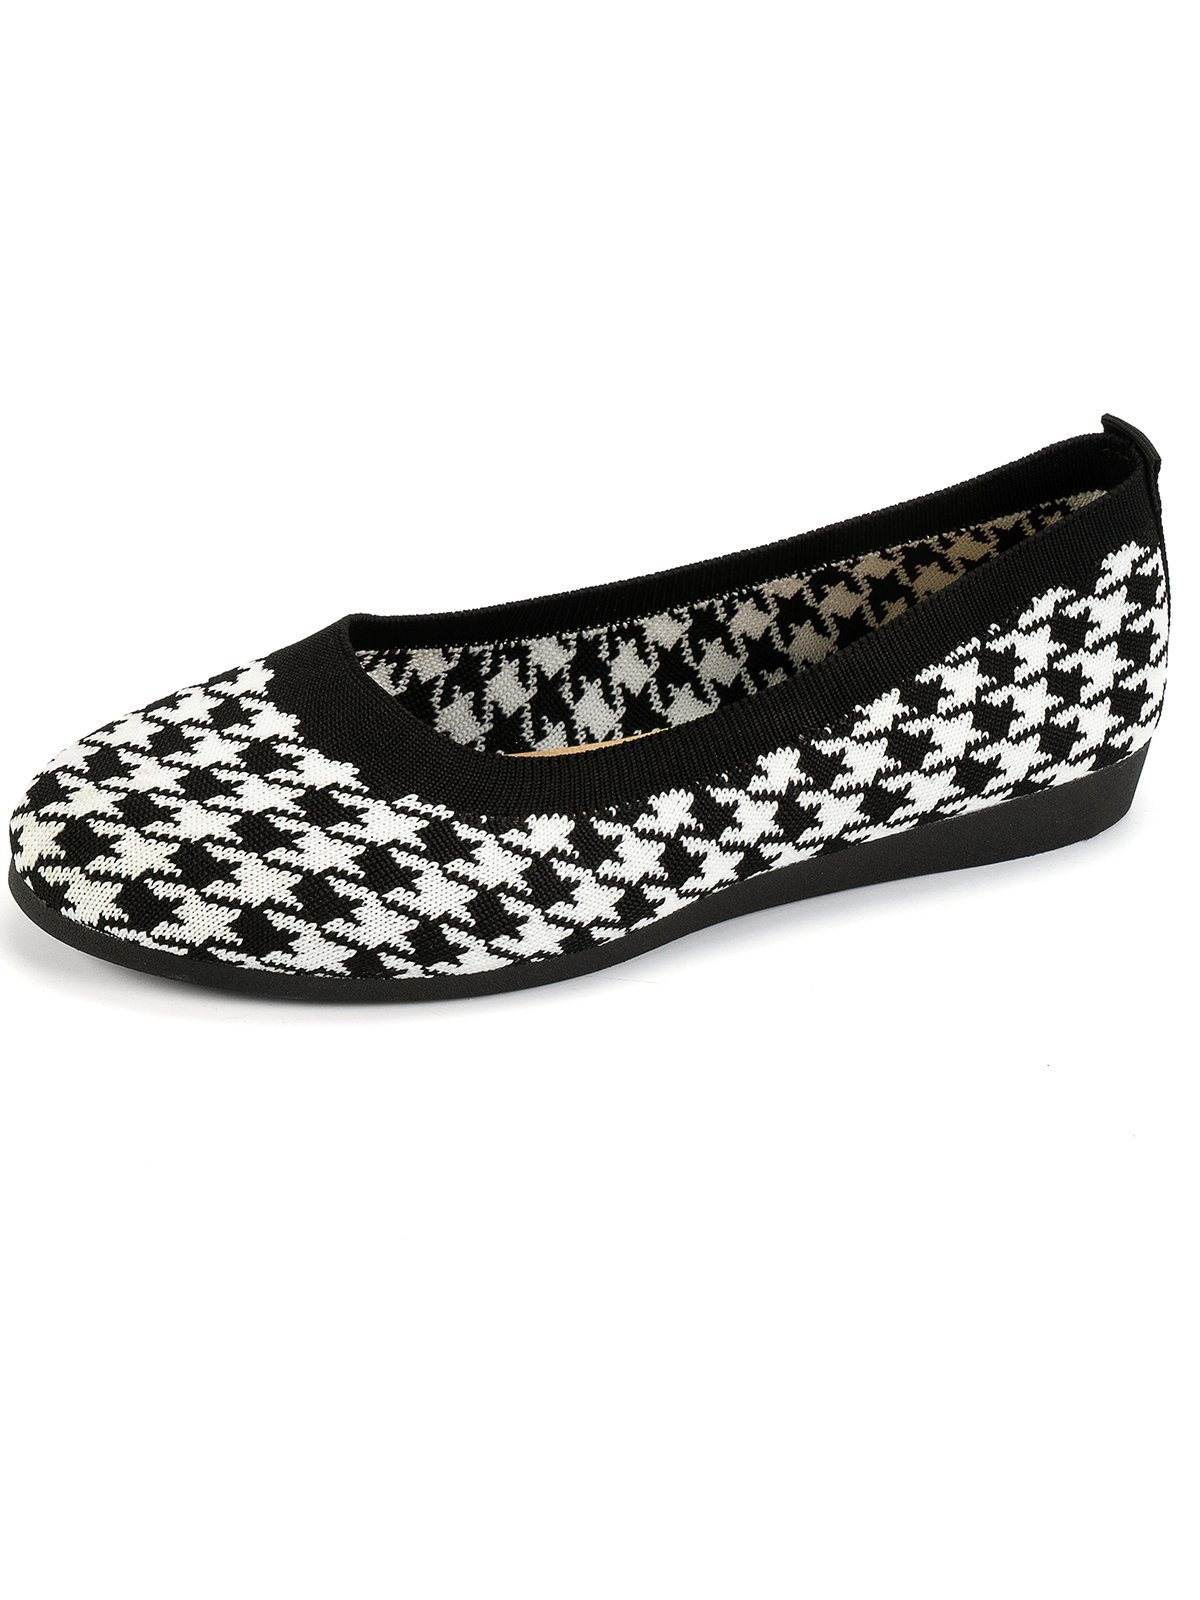 Casual Houndstooth Breathable Slip On Flat Heel Shallow Shoes